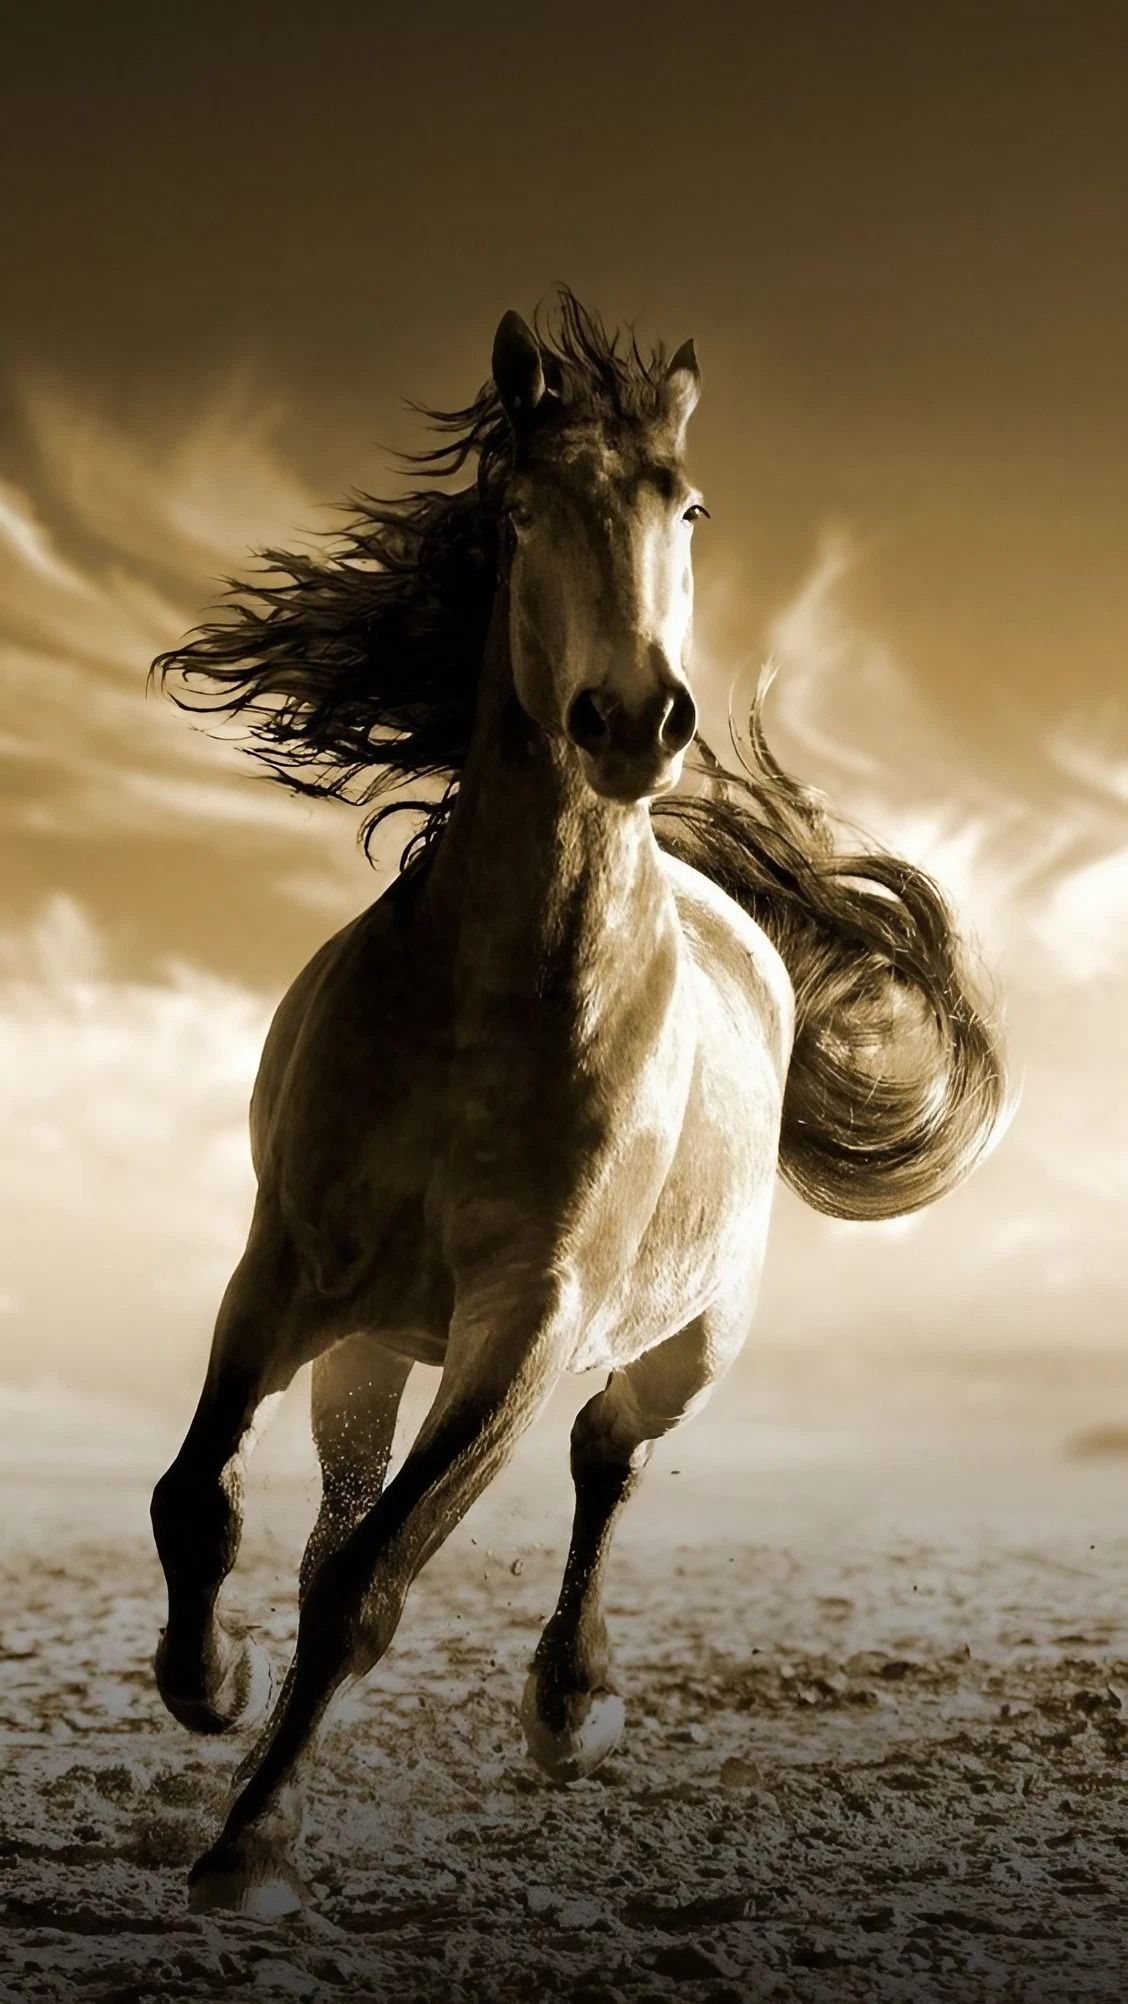 A white horse with a long mane running in the sand - Horse